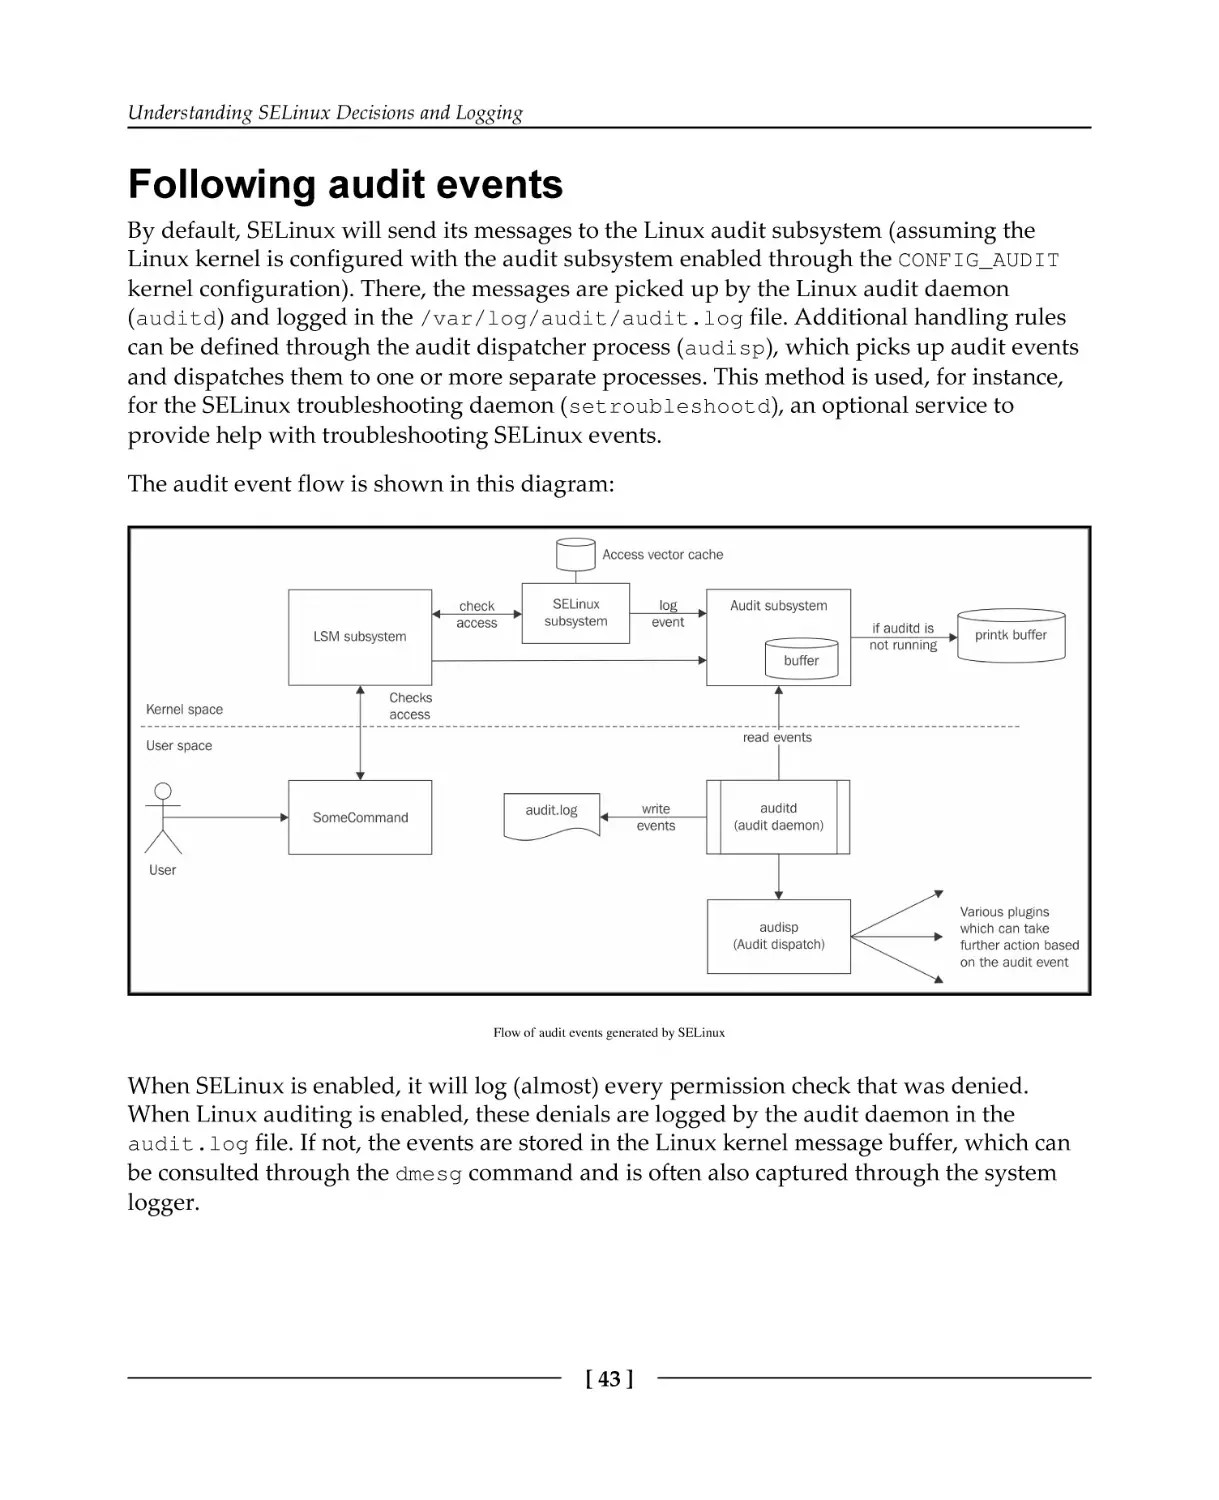 Following audit events